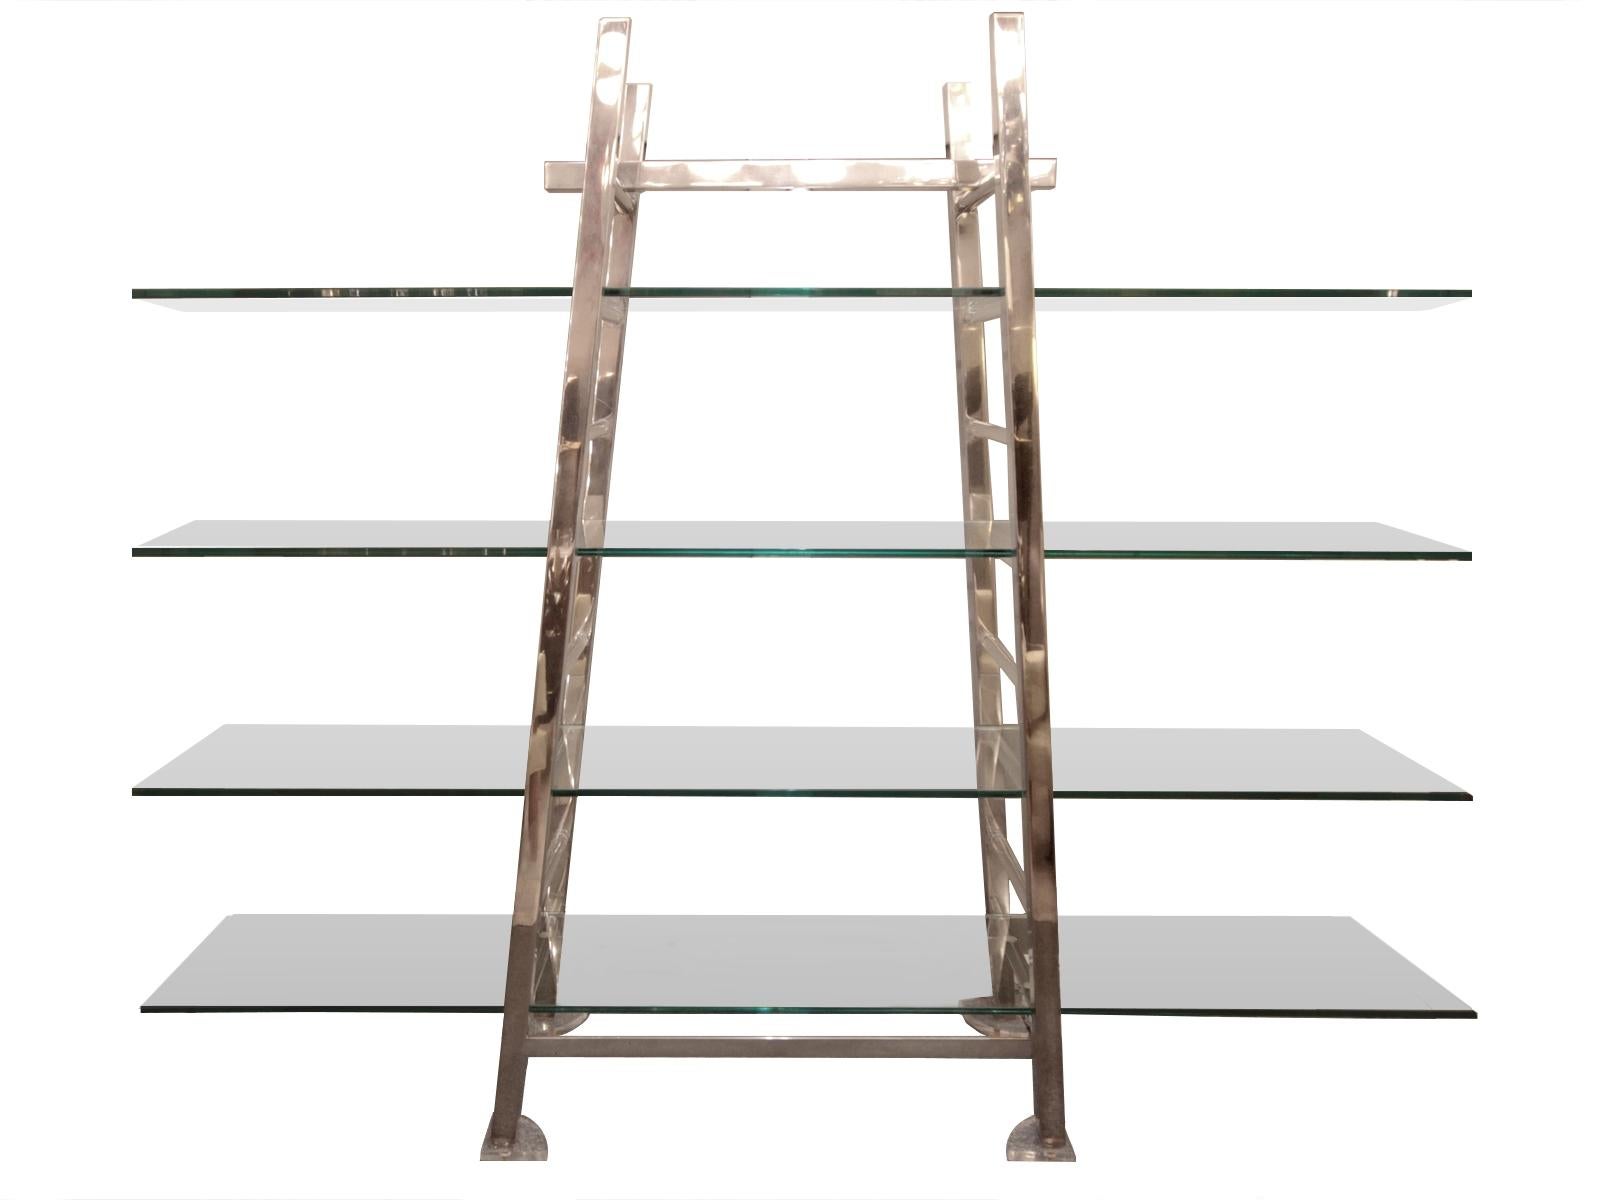 Structure in chromed metal and Plexiglas, shelves of clear glass.
A lighting lamp is hidden in the upper central bar, to illuminate the objects on the shelves.

Measures: Height 6 ft0 3.19 in
Width 7 ft. 6.55 in. The shelves can be reduced